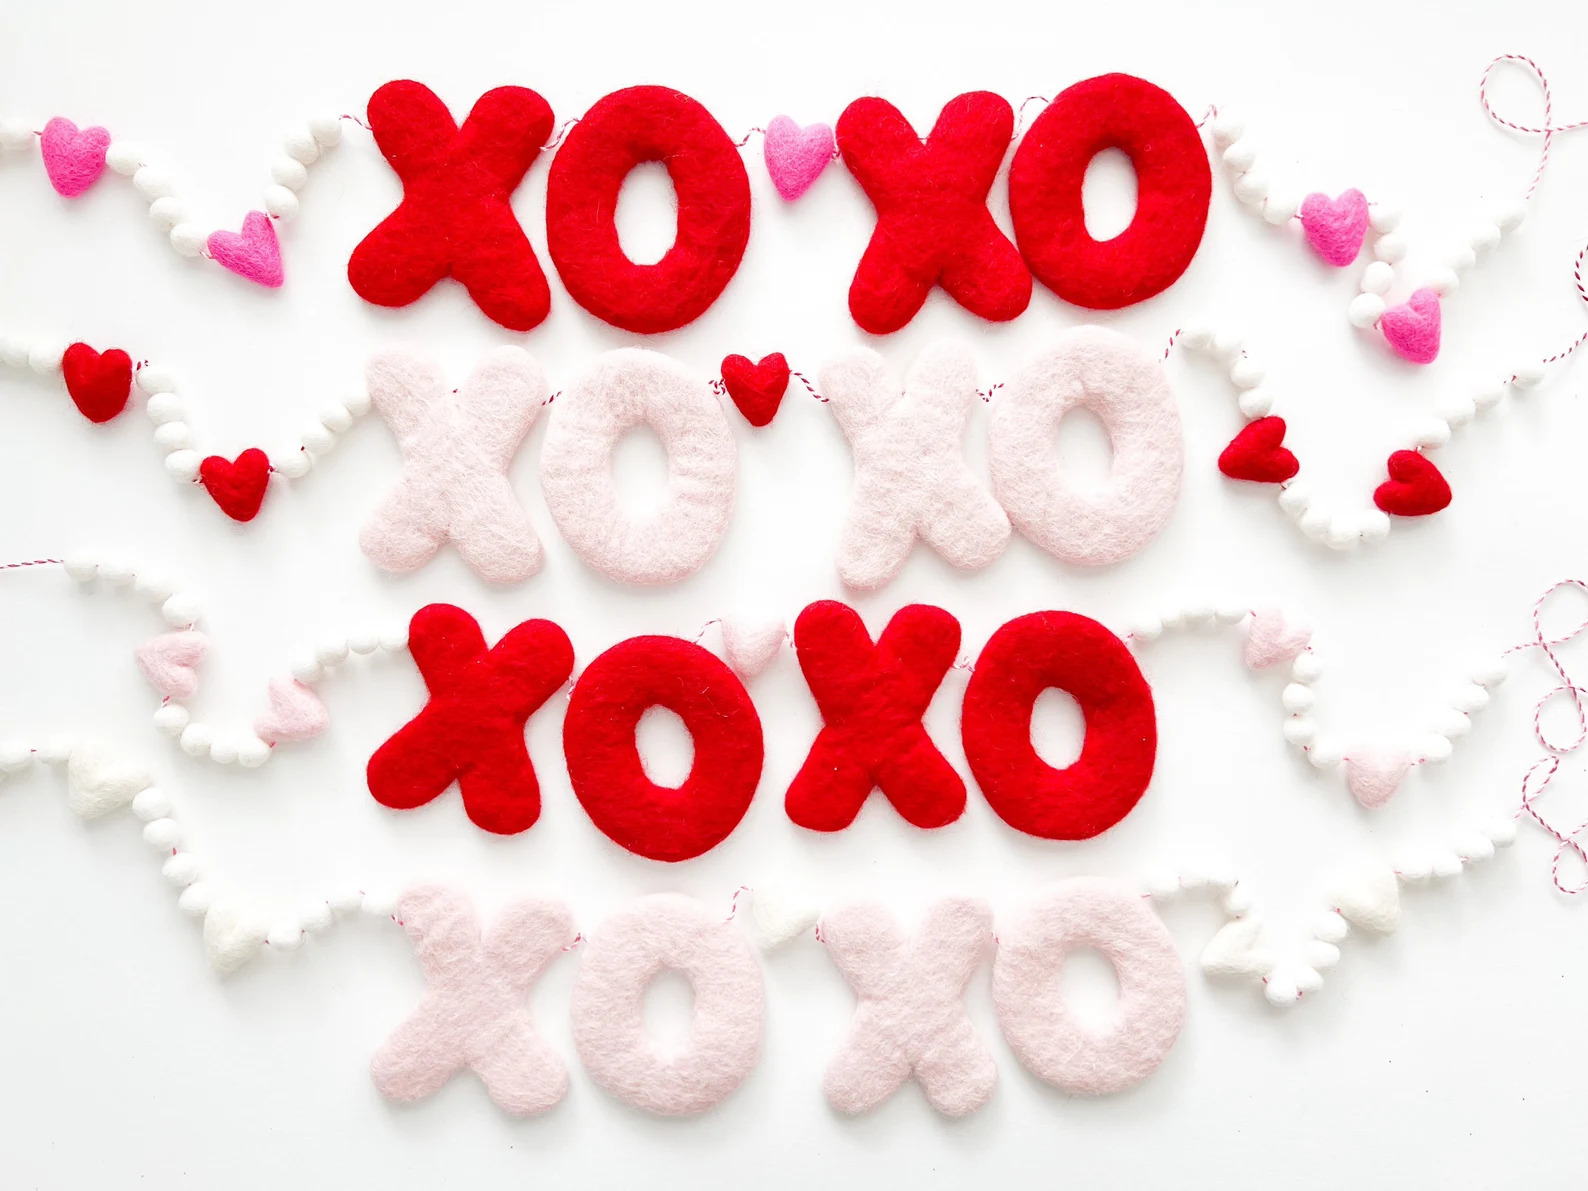 15 Whimsical Valentine's Day Banner Designs to Spread the Love